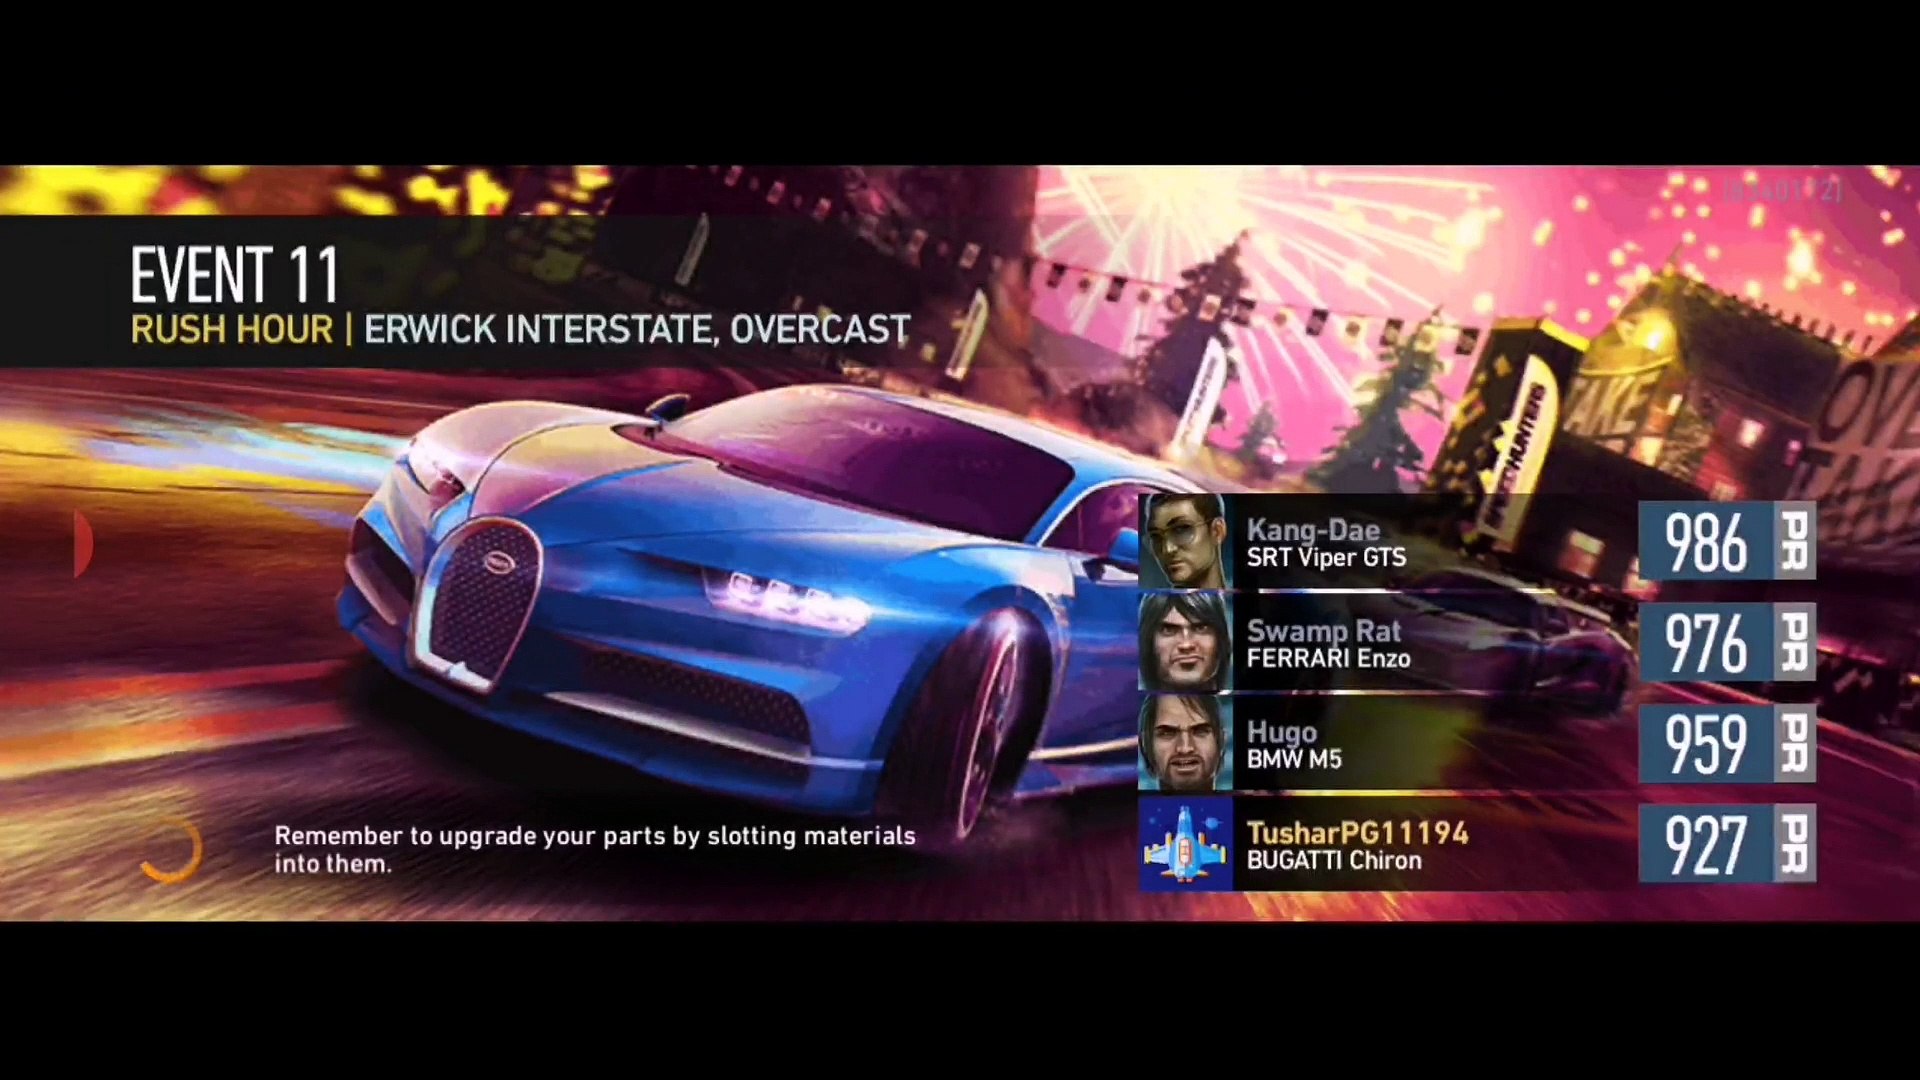 Nfs No Limits Gameplay Nfs 25th Anniversary Bugatti Chiron Day 7 Event 11 16 Video Dailymotion